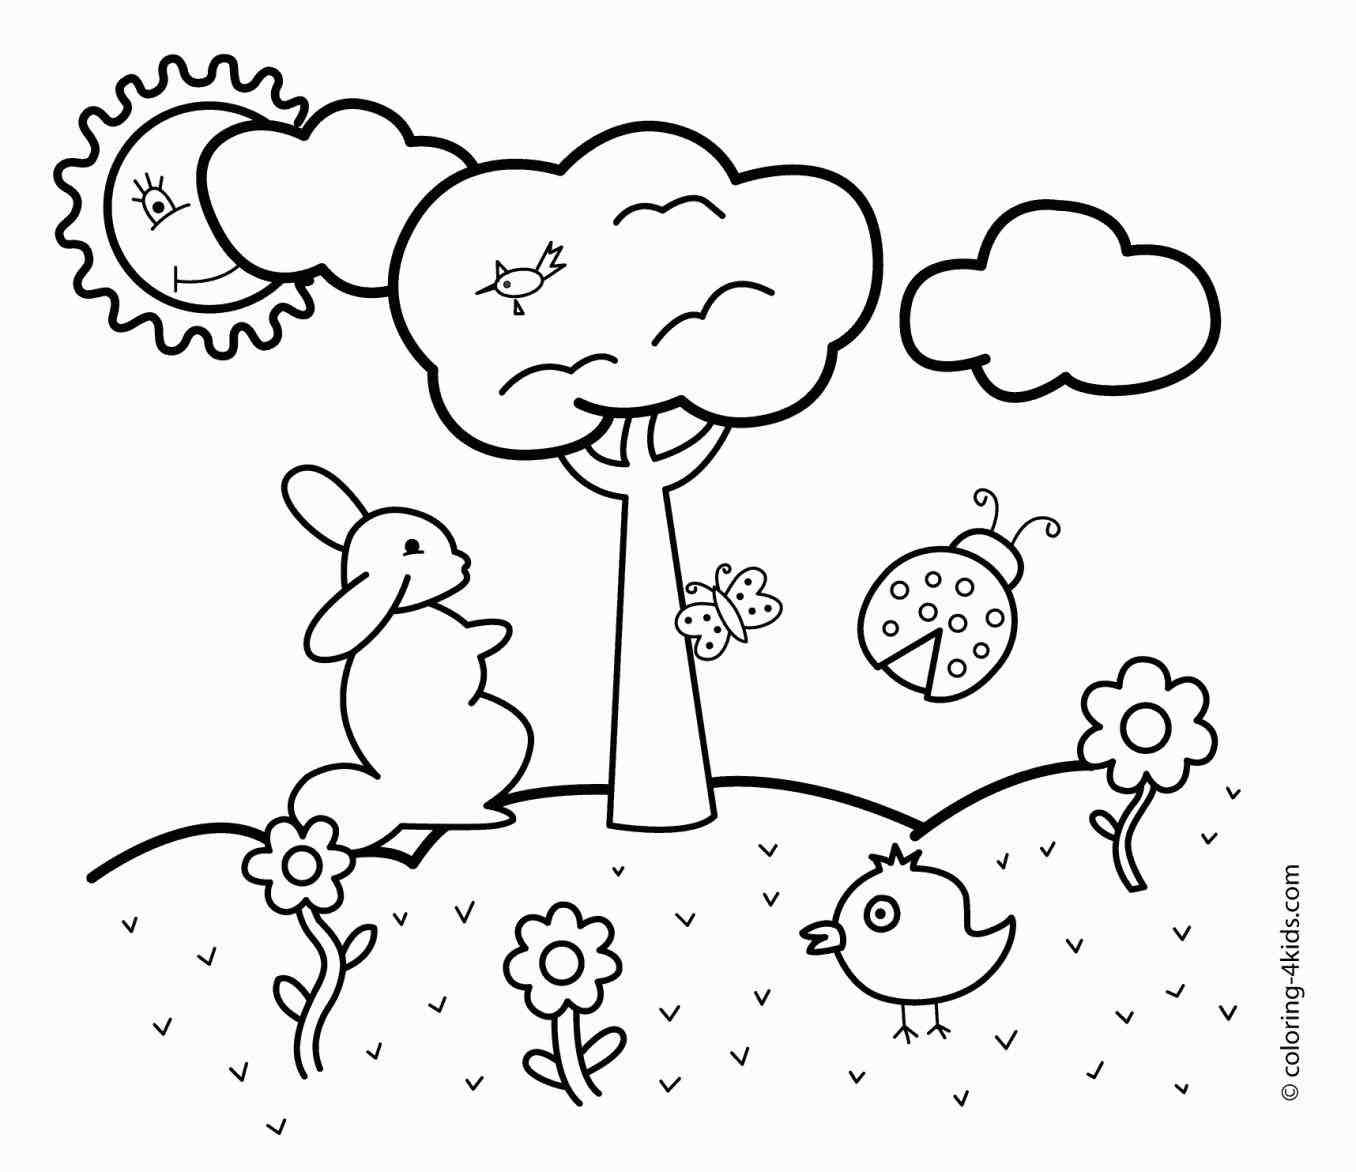 Kids Spring Coloring Pages
 The Collection of Drawing spring drawings easy for